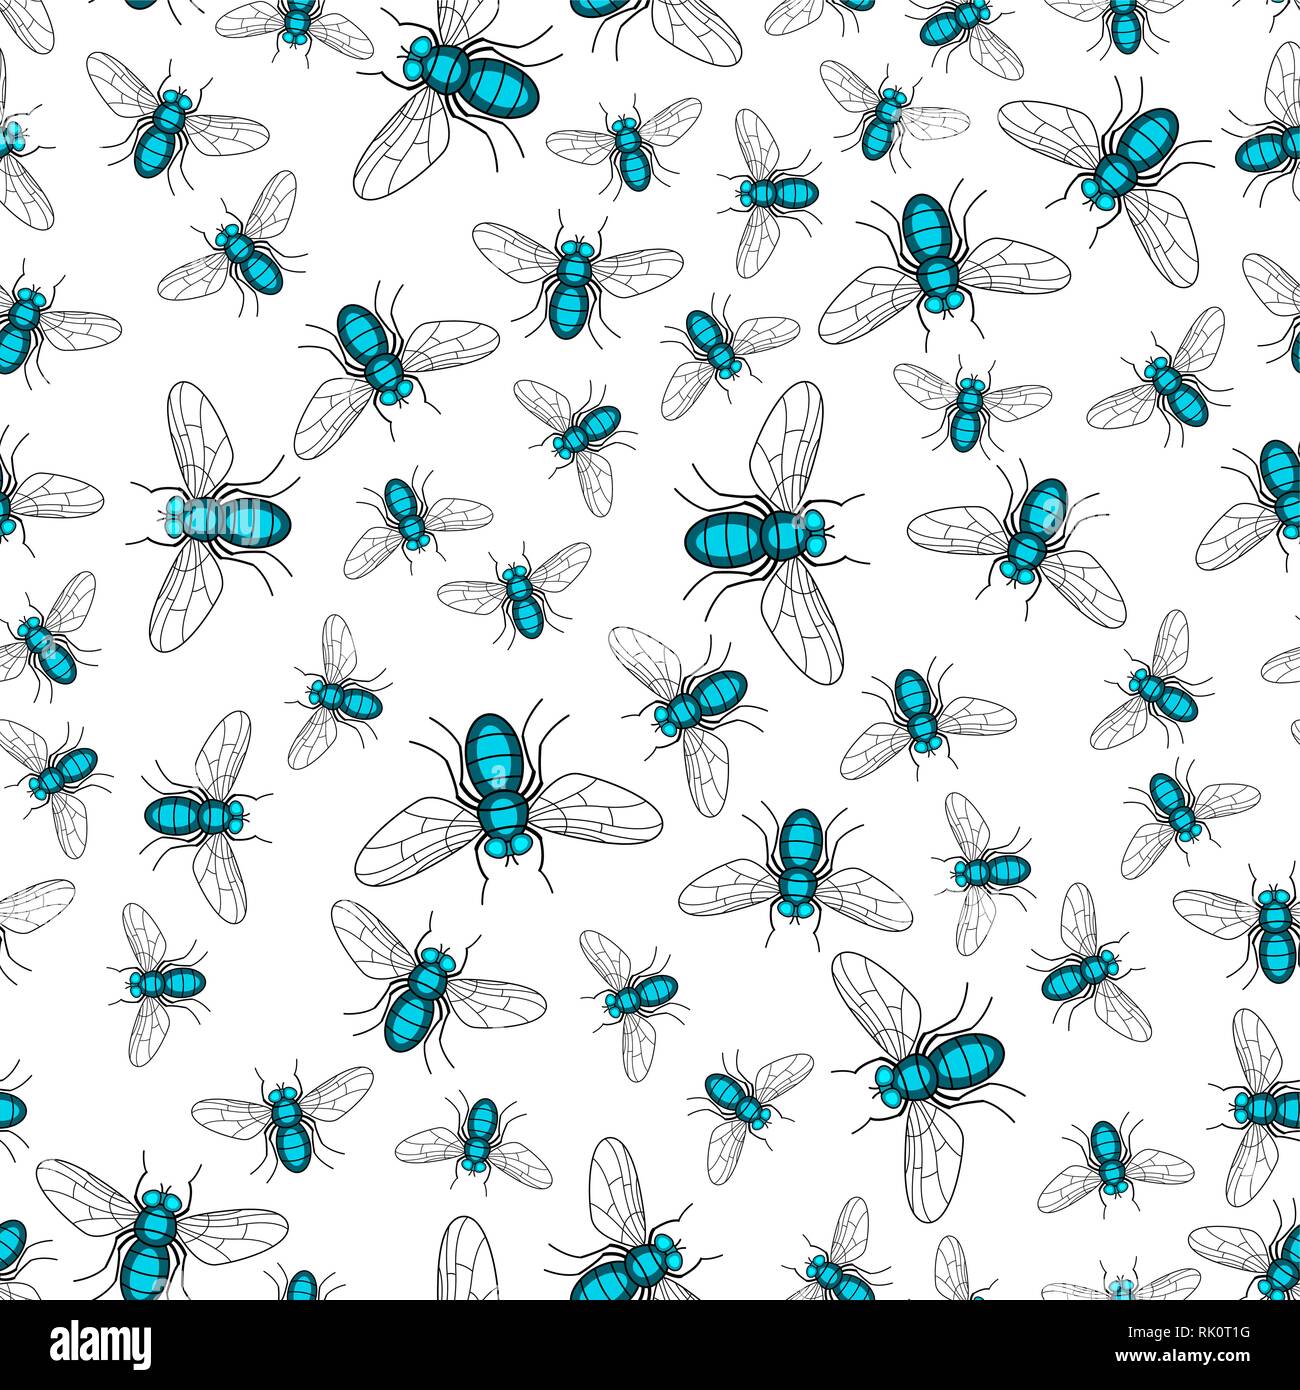 Seamless pattern of the random fly insects Stock Vector